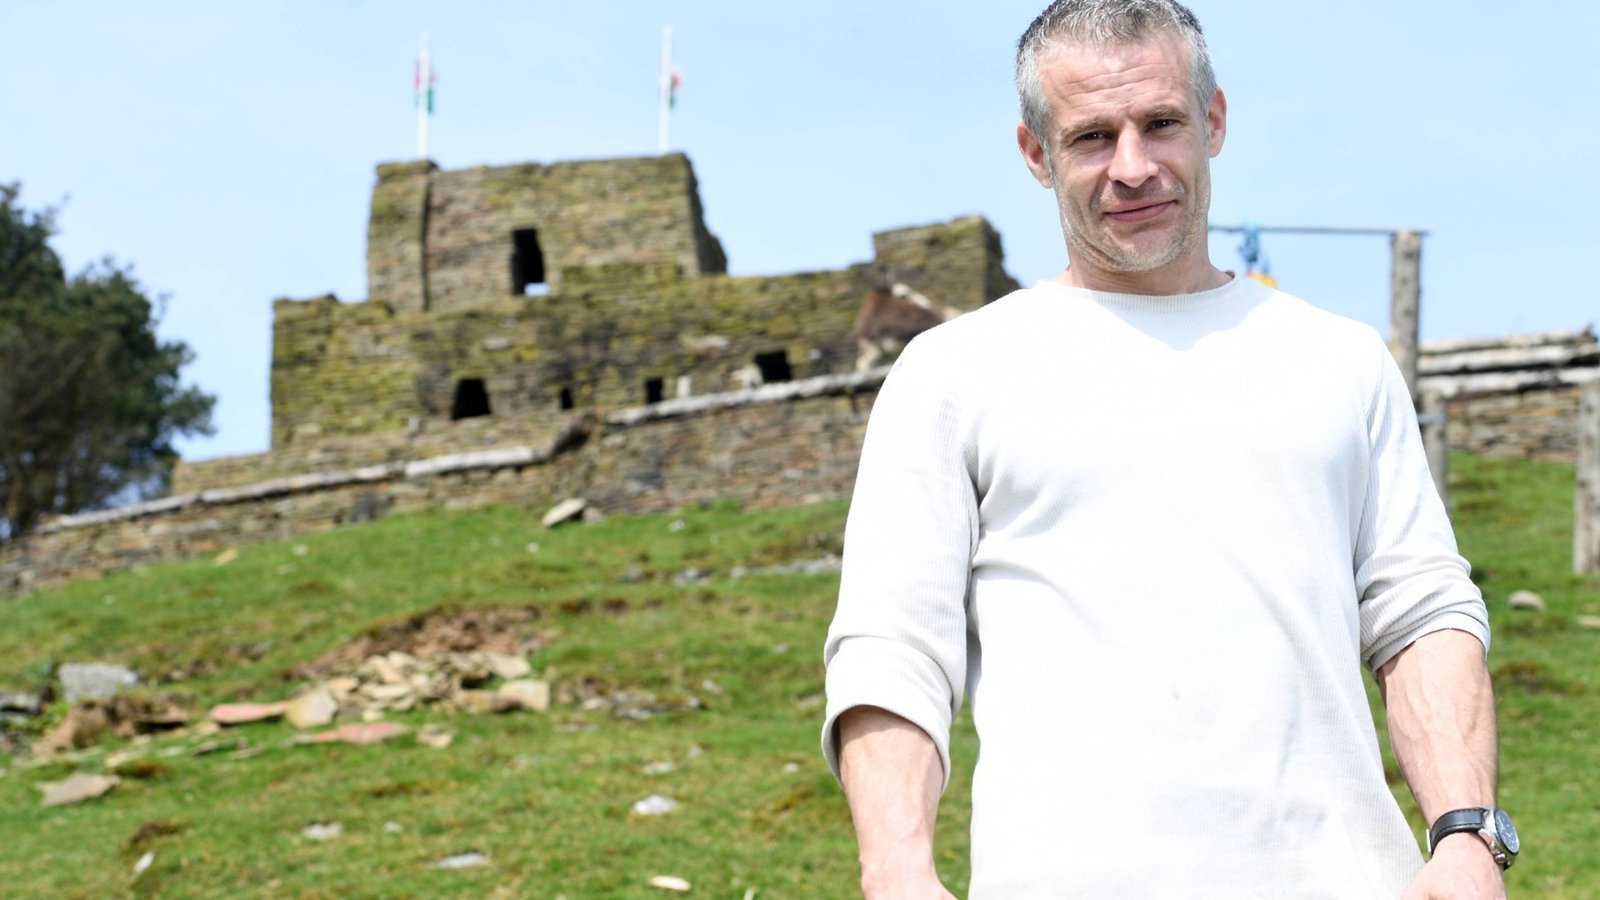 I built castle by hand but now forced to tear it down for SECOND time by council, says ‘real-life Rambo’ war hero